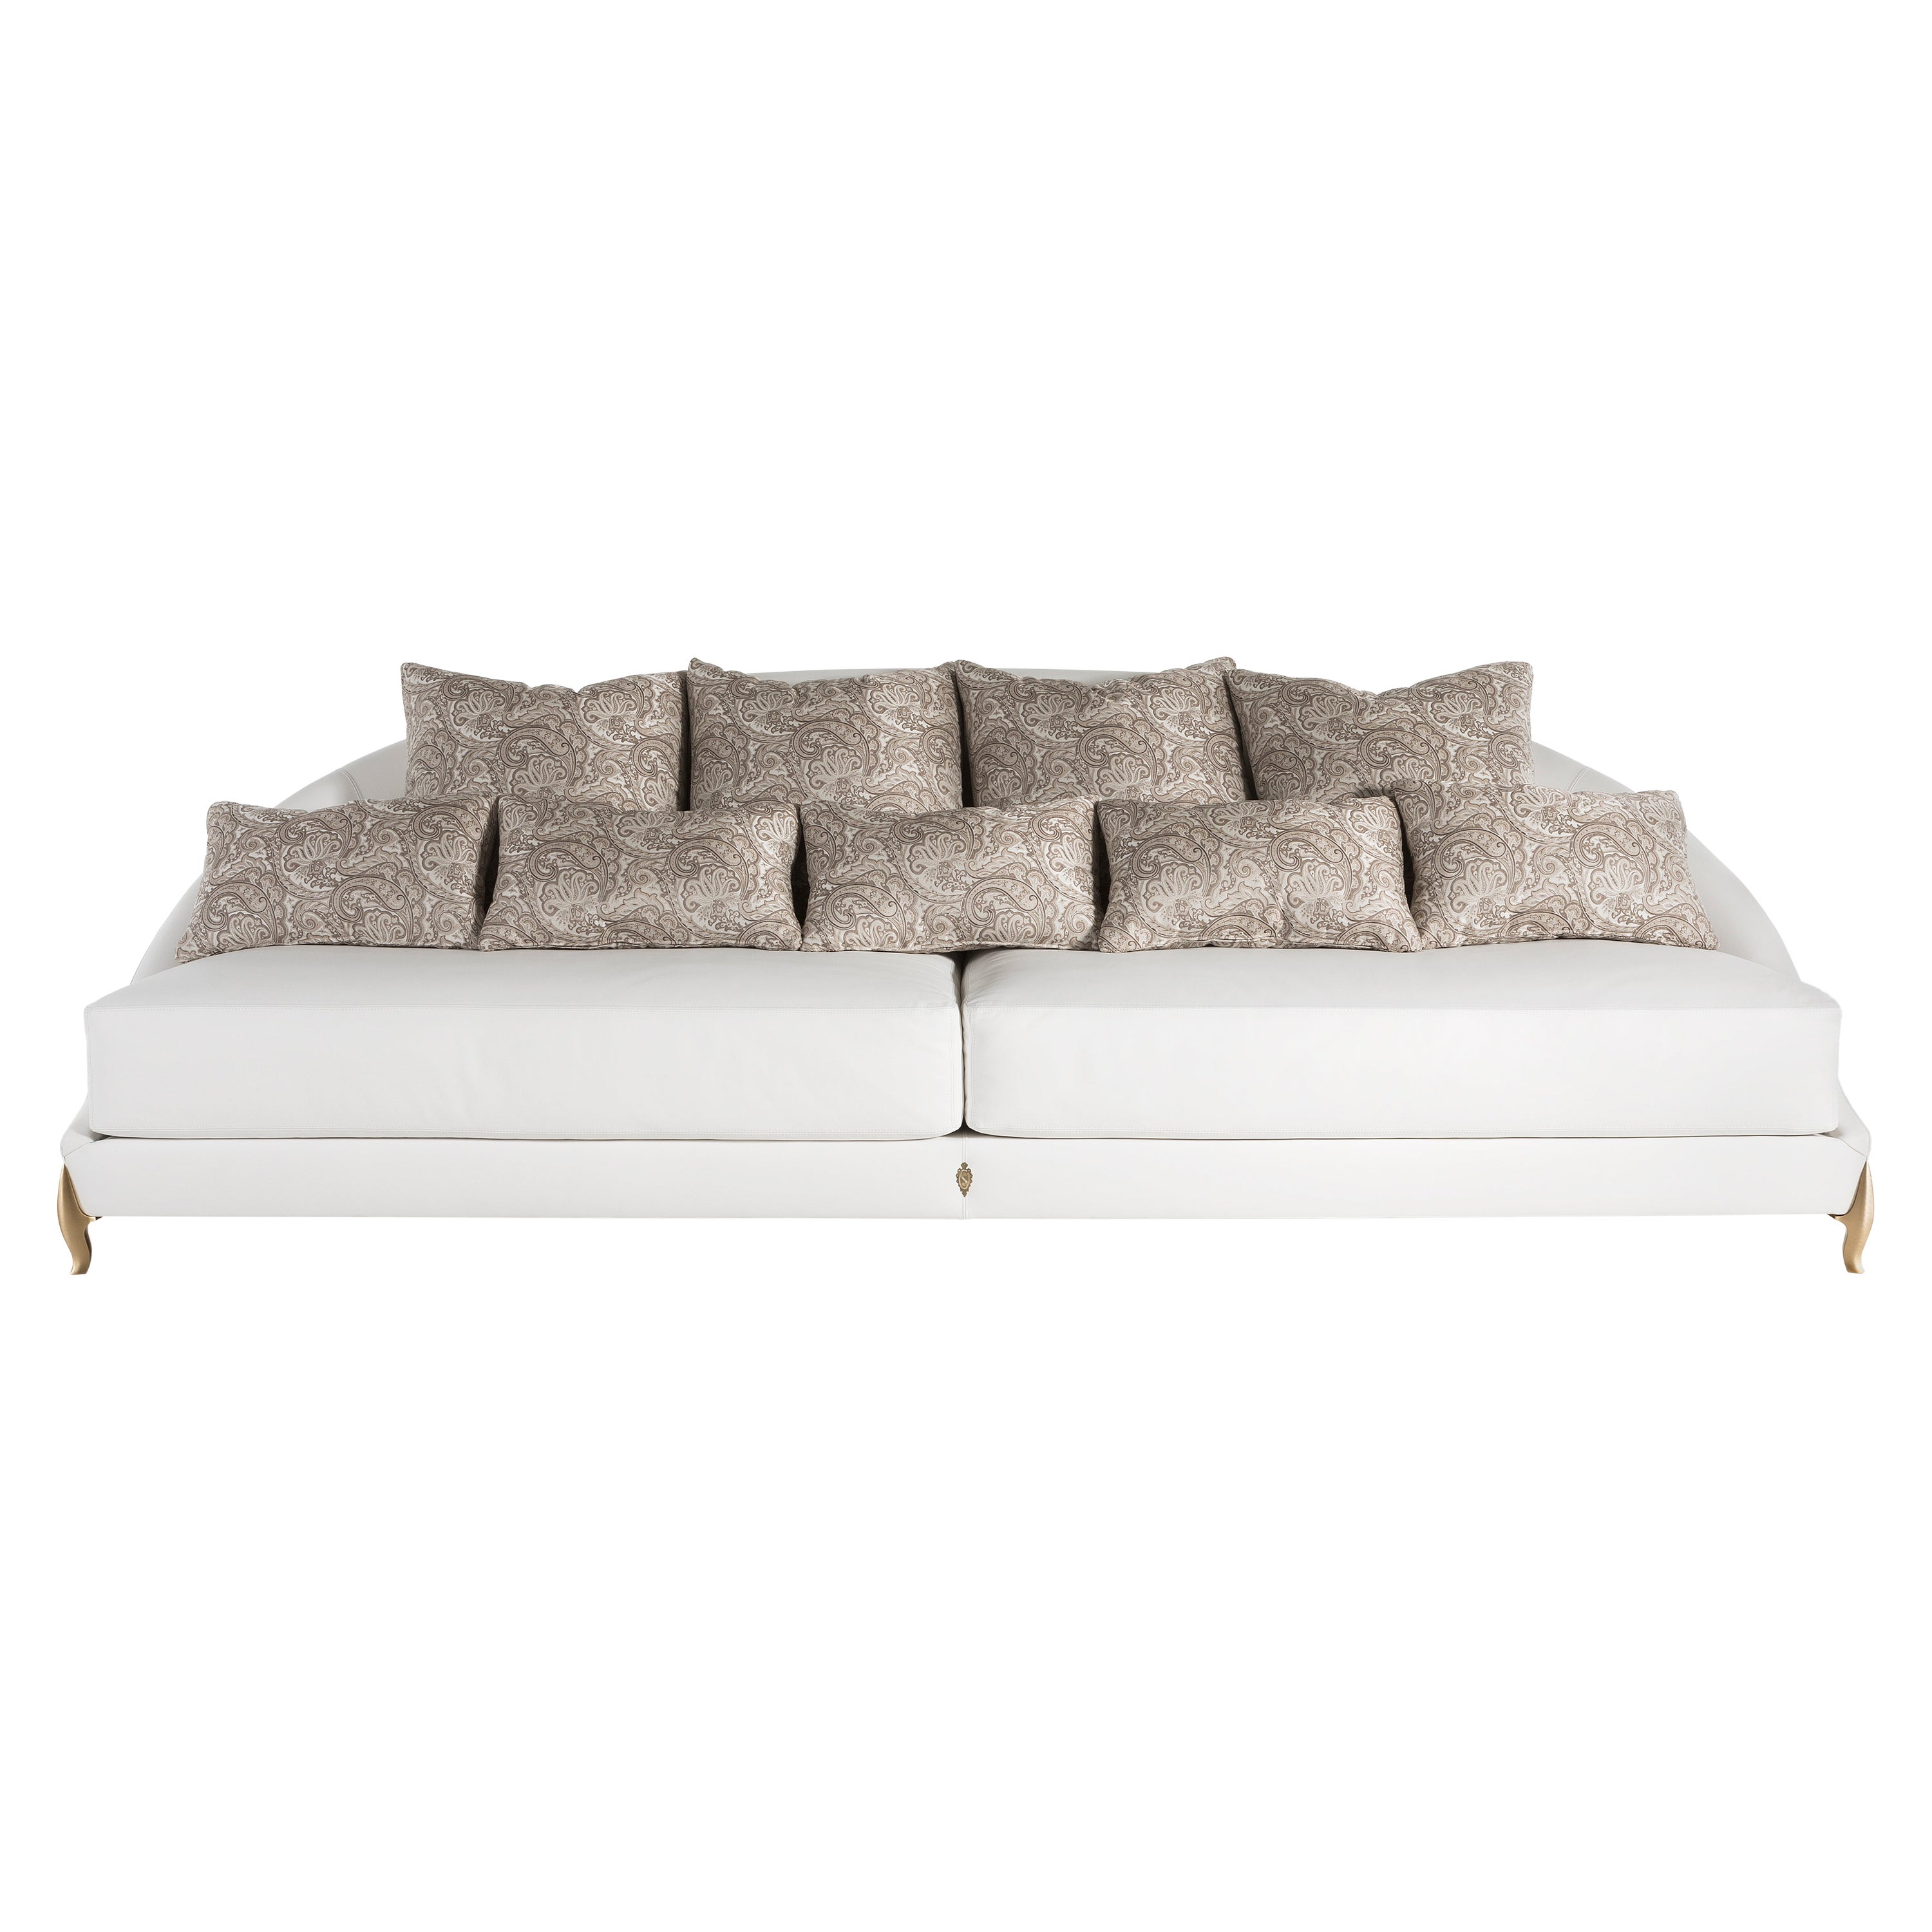 Contemporary Living Sofa, Brass Feet and Fully Upholstered, Made in Italy For Sale